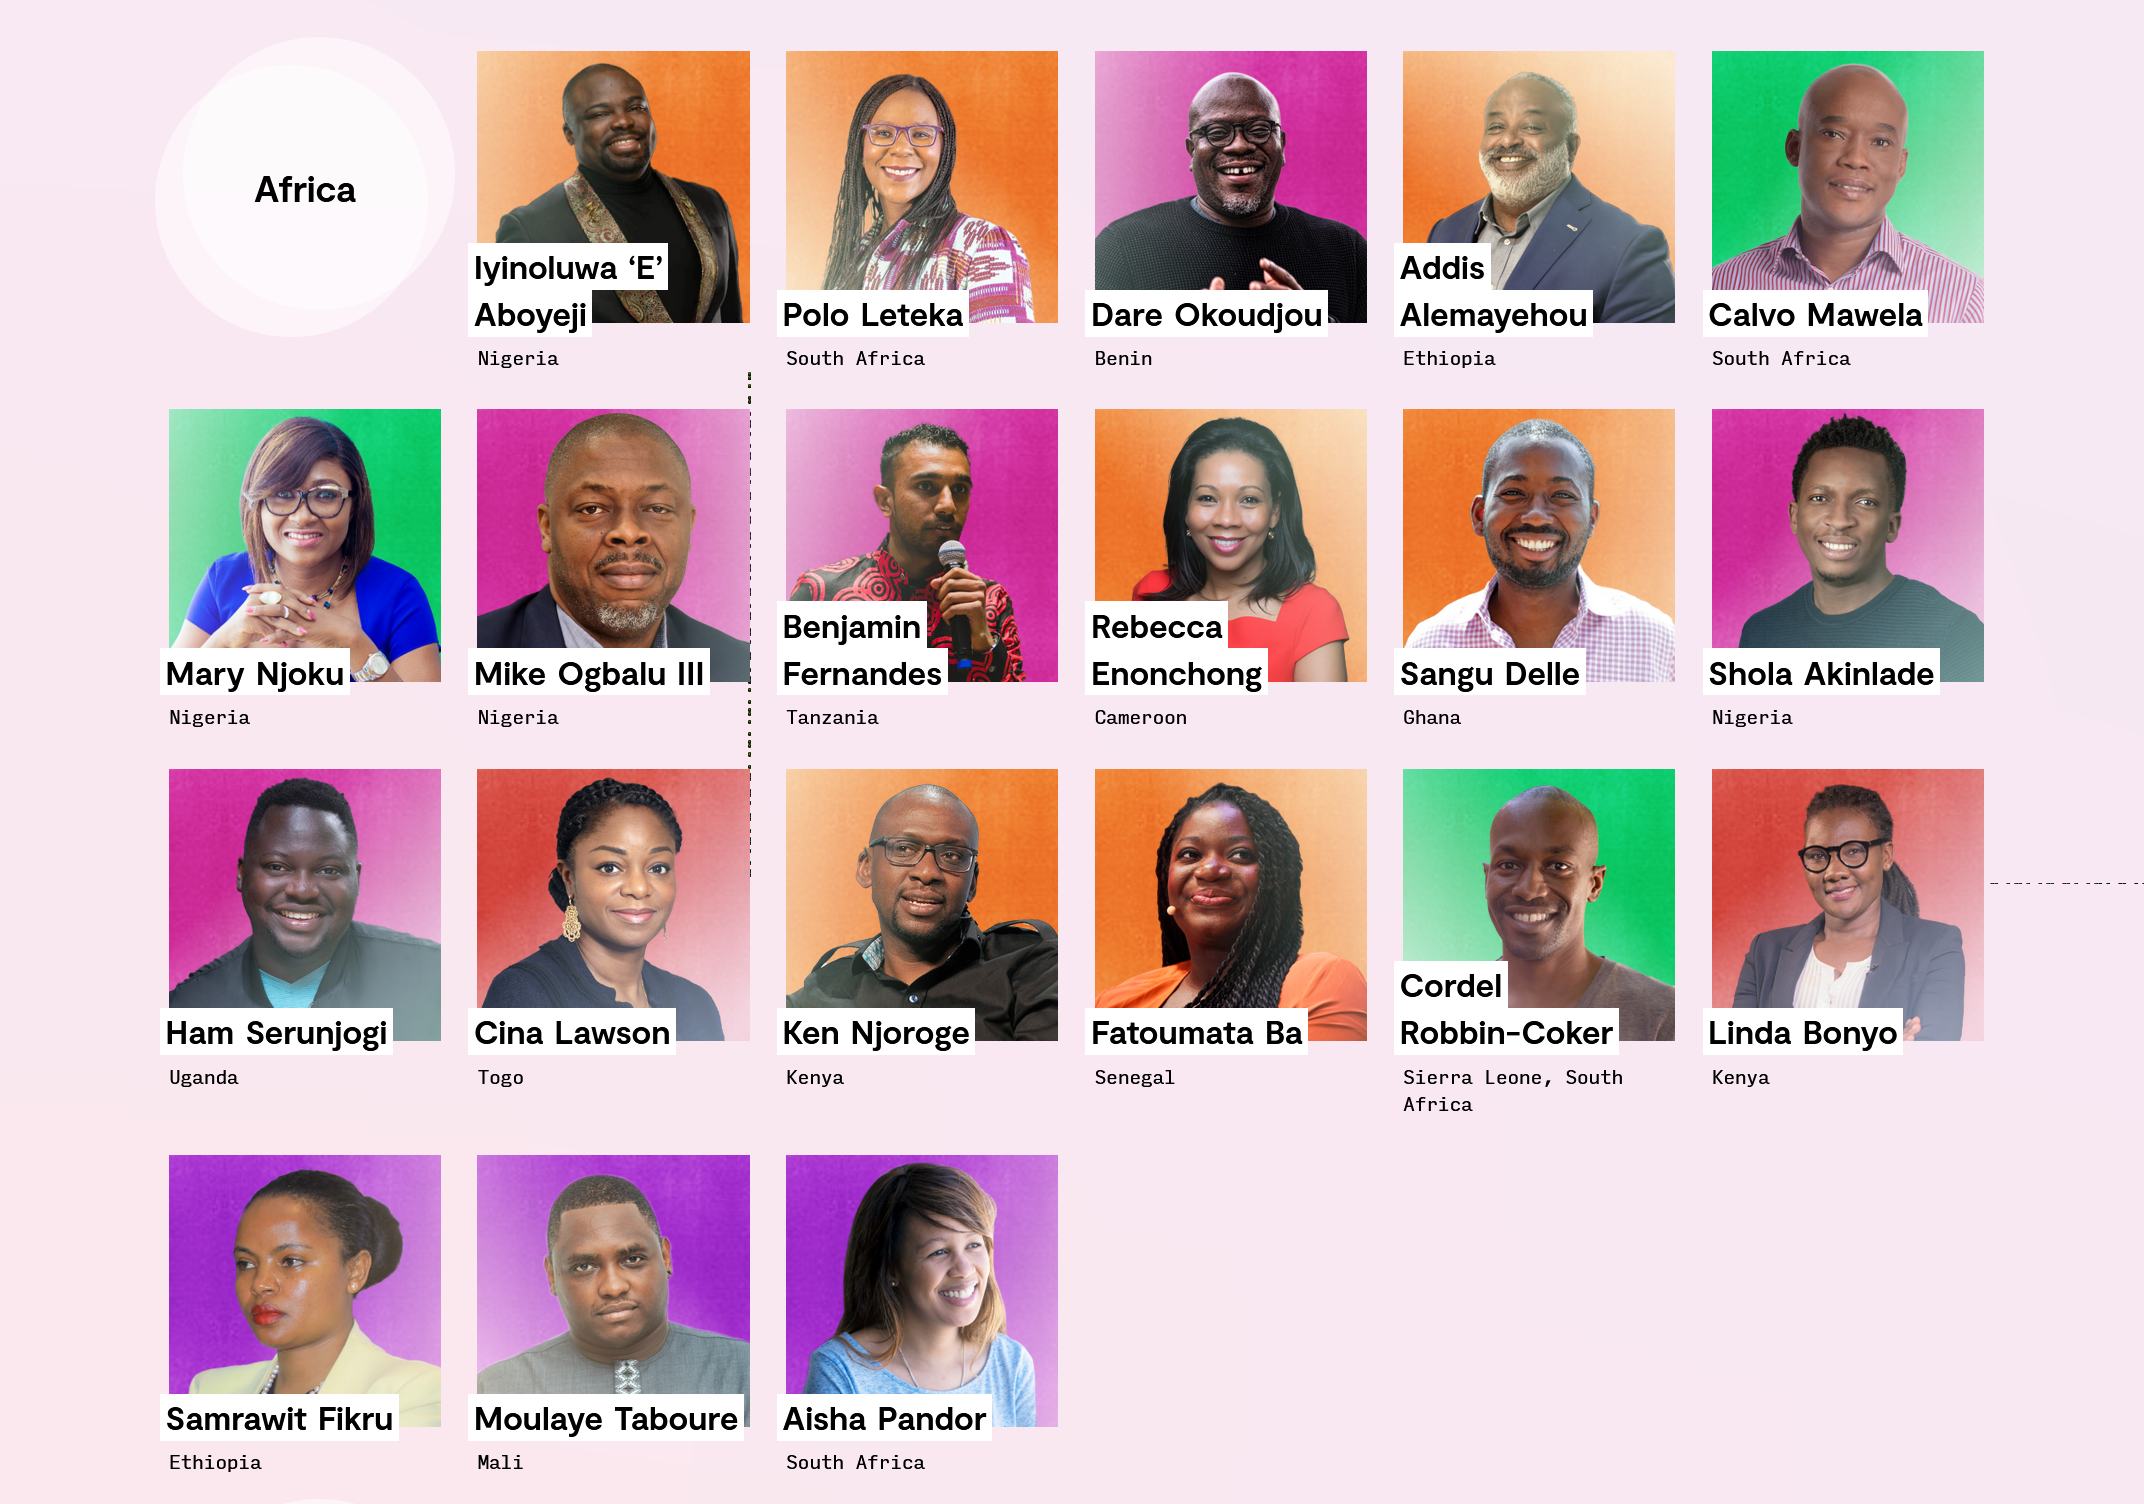 Meet the 20 African business leaders named among this year\'s 100 Global Tech Changemakers